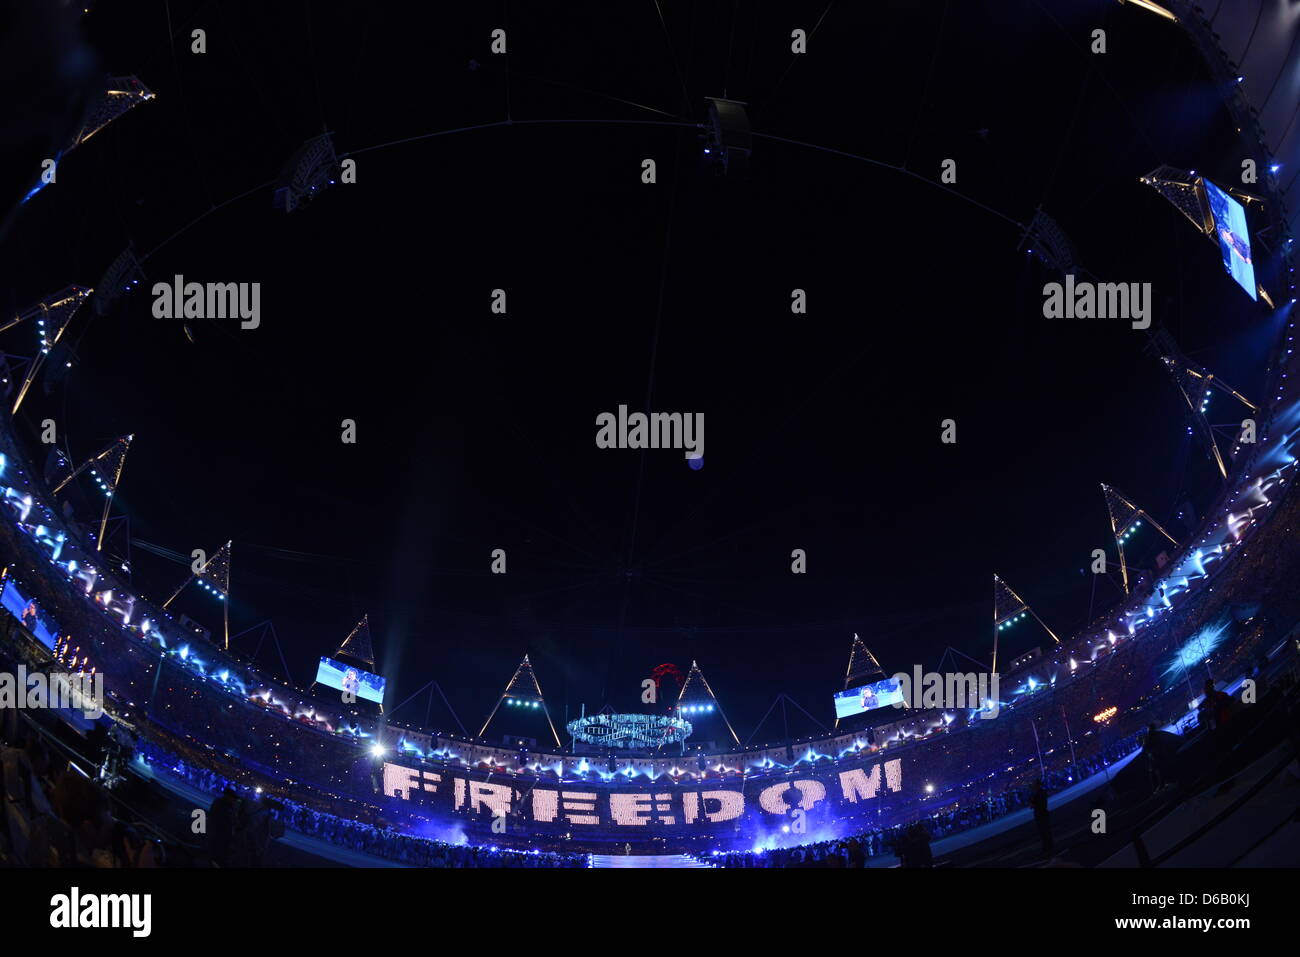 A General view in the Olympic Stadium with slogan ' Freedom ' on the stands during the Closing Ceremony of the London 2012 Olympic Games, London, Great Britain, 12 August 2012. Photo: Marius Becker dpa  +++(c) dpa - Bildfunk+++ Stock Photo